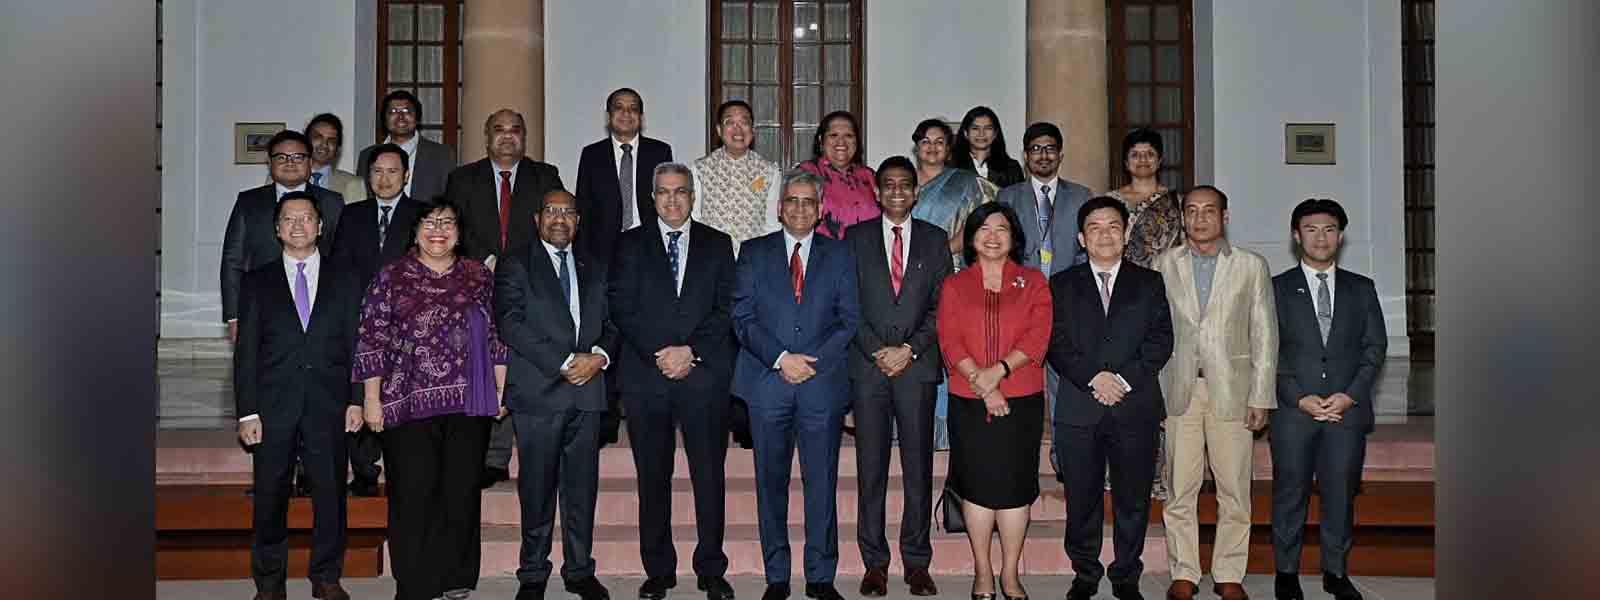 Secretary (East) Shri Saurabh Kumar hosted resident Heads of Missions of ASEAN and Pacific Island Countries in New Delhi